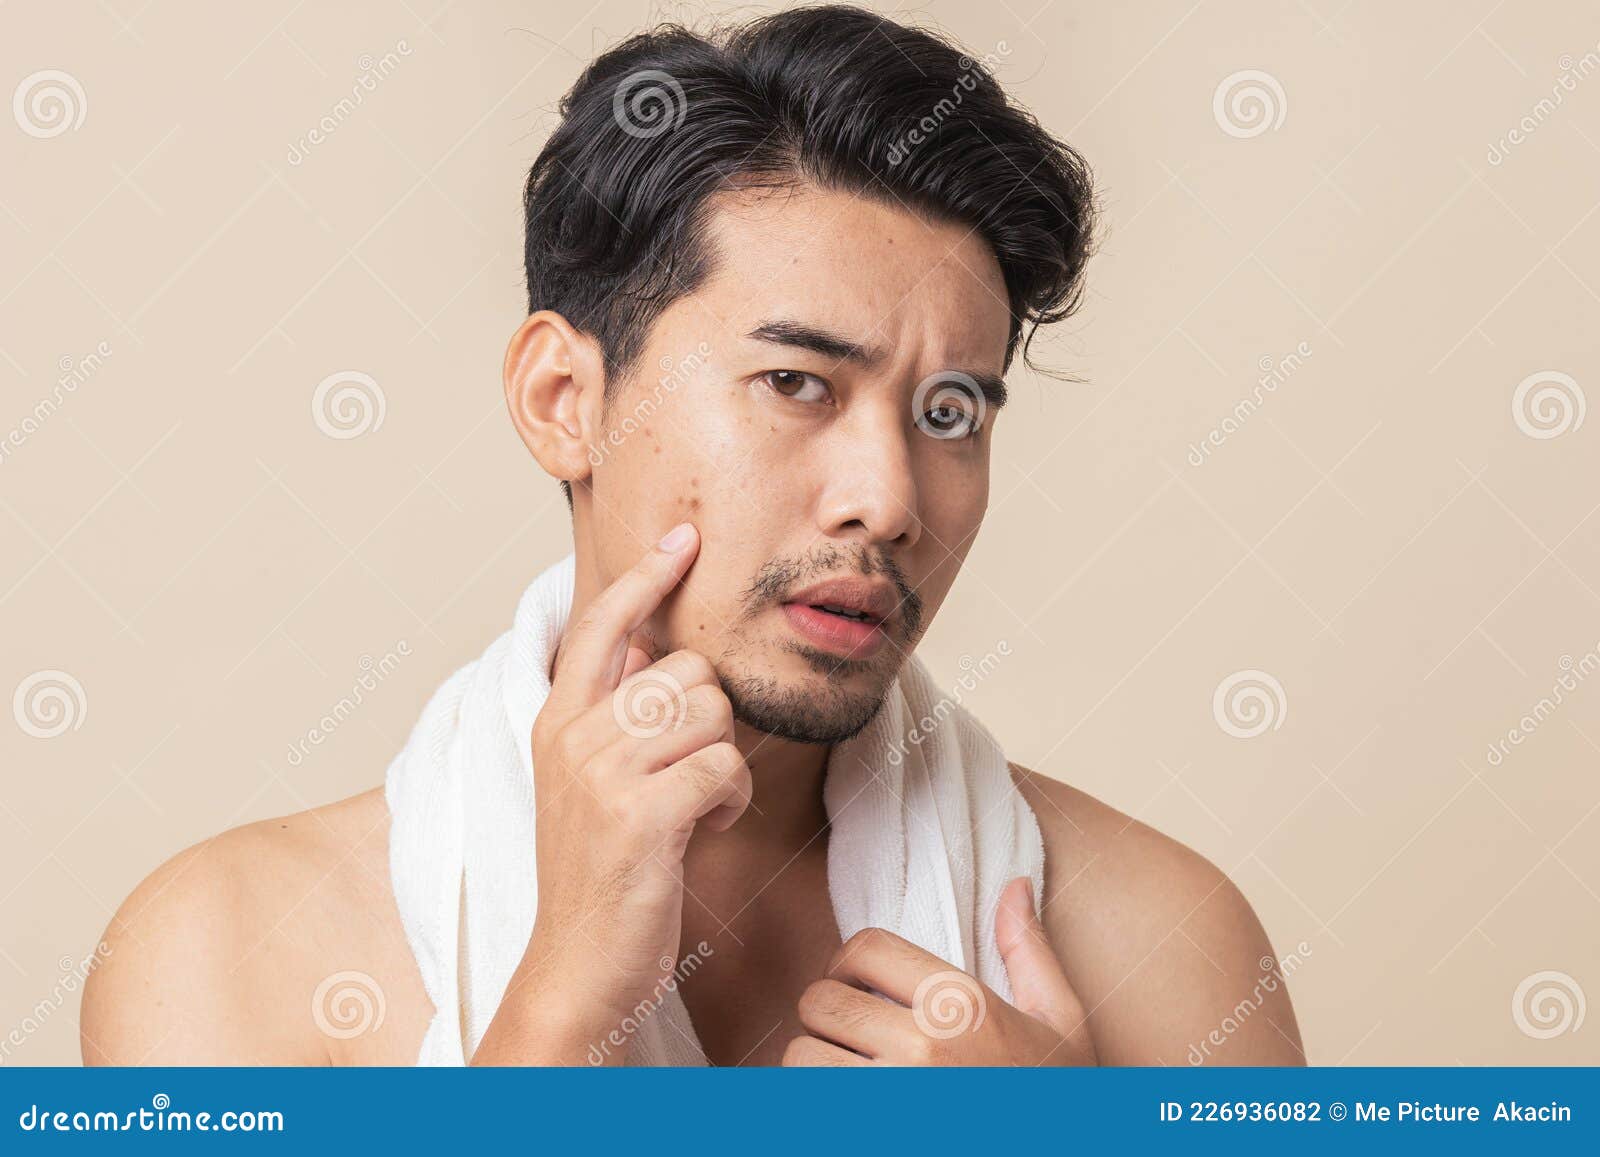 asian man worry have blemish on face caused by acne